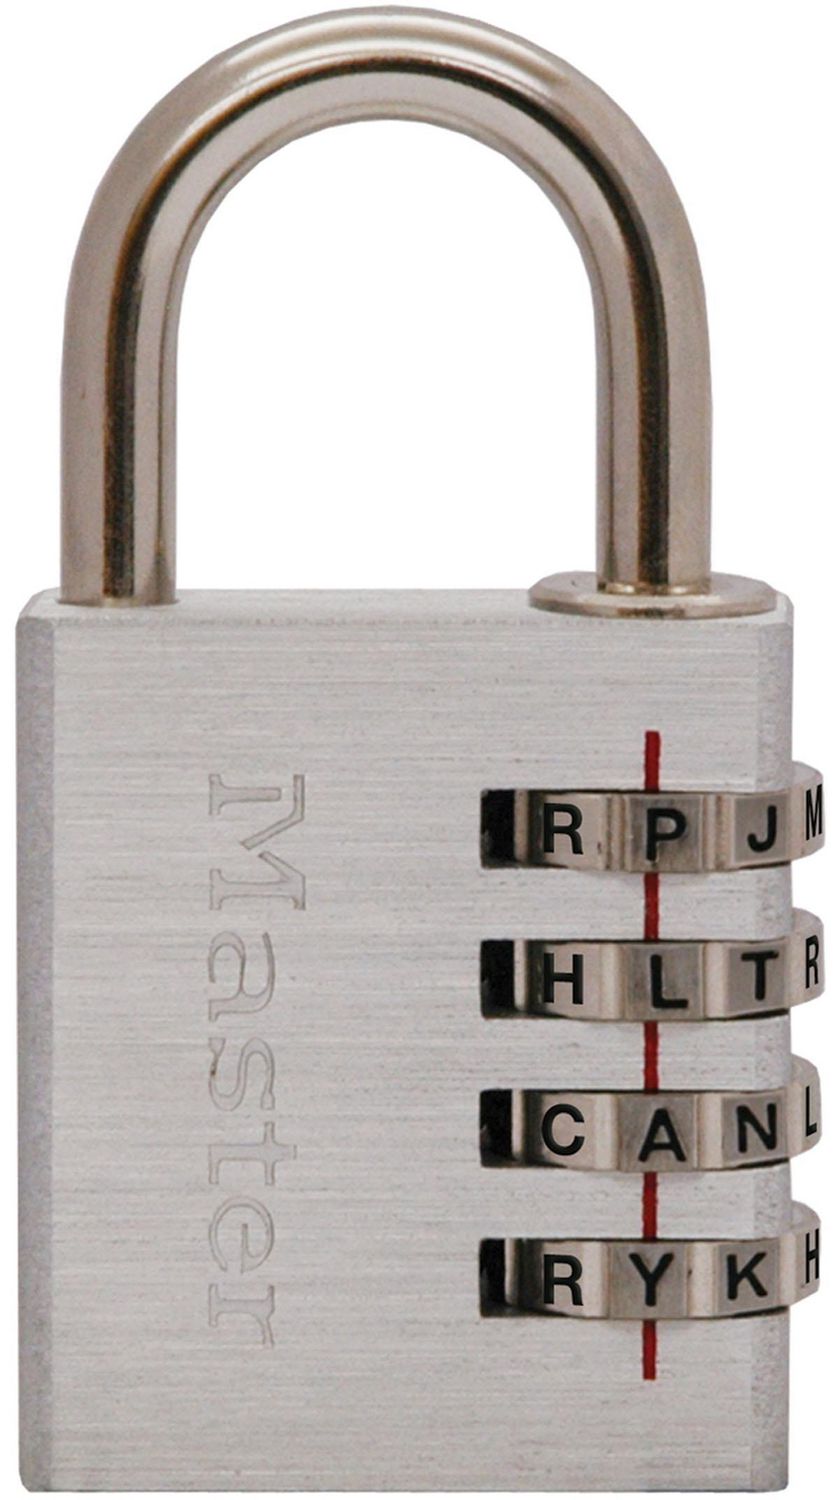 Master Lock Canada Master Lock Set-Your-Own Combination Luggage